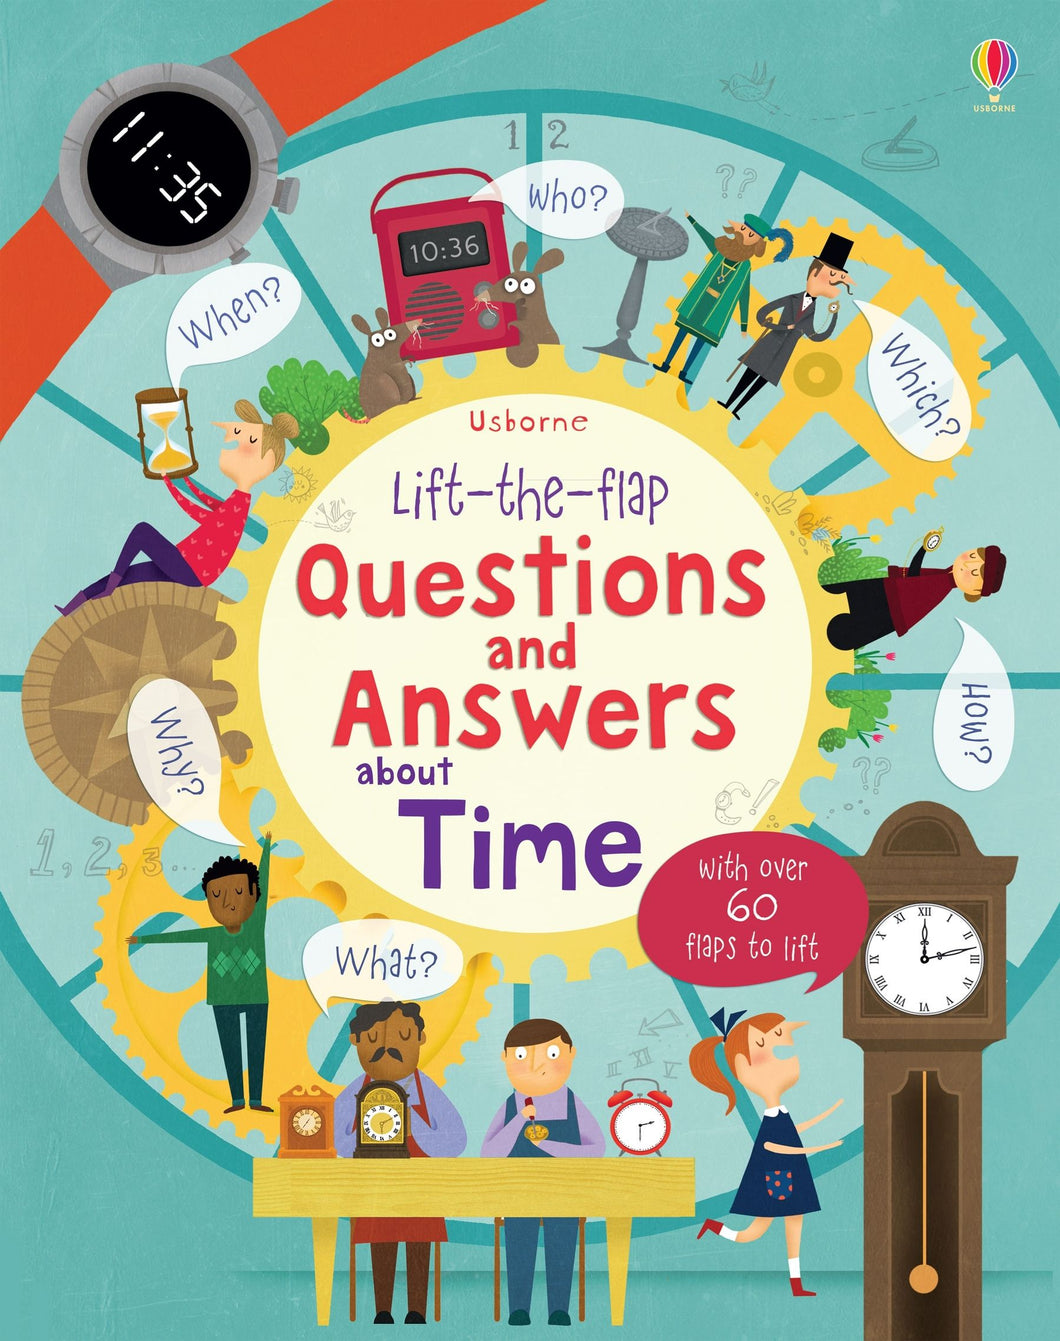 Lift-the-flap Questions and Answers: About Time